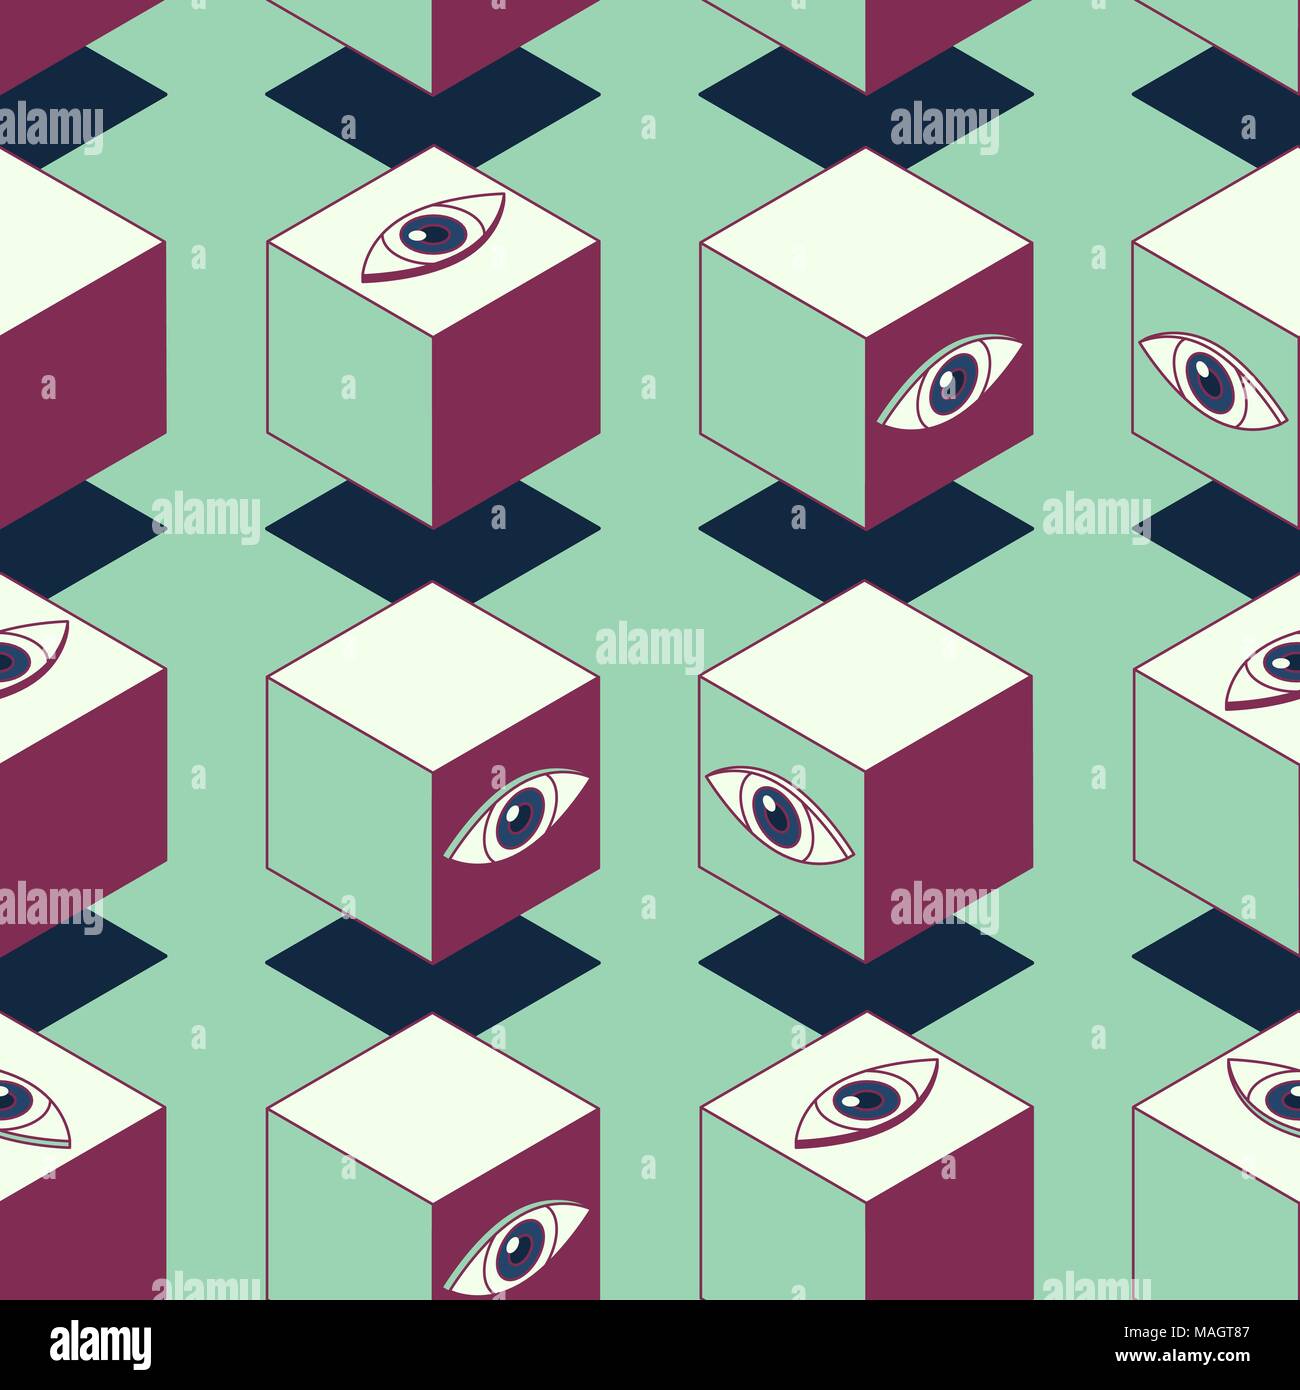 Abstract cubes with eyes. Seamless pattern. Clipping mask used. Stock Vector